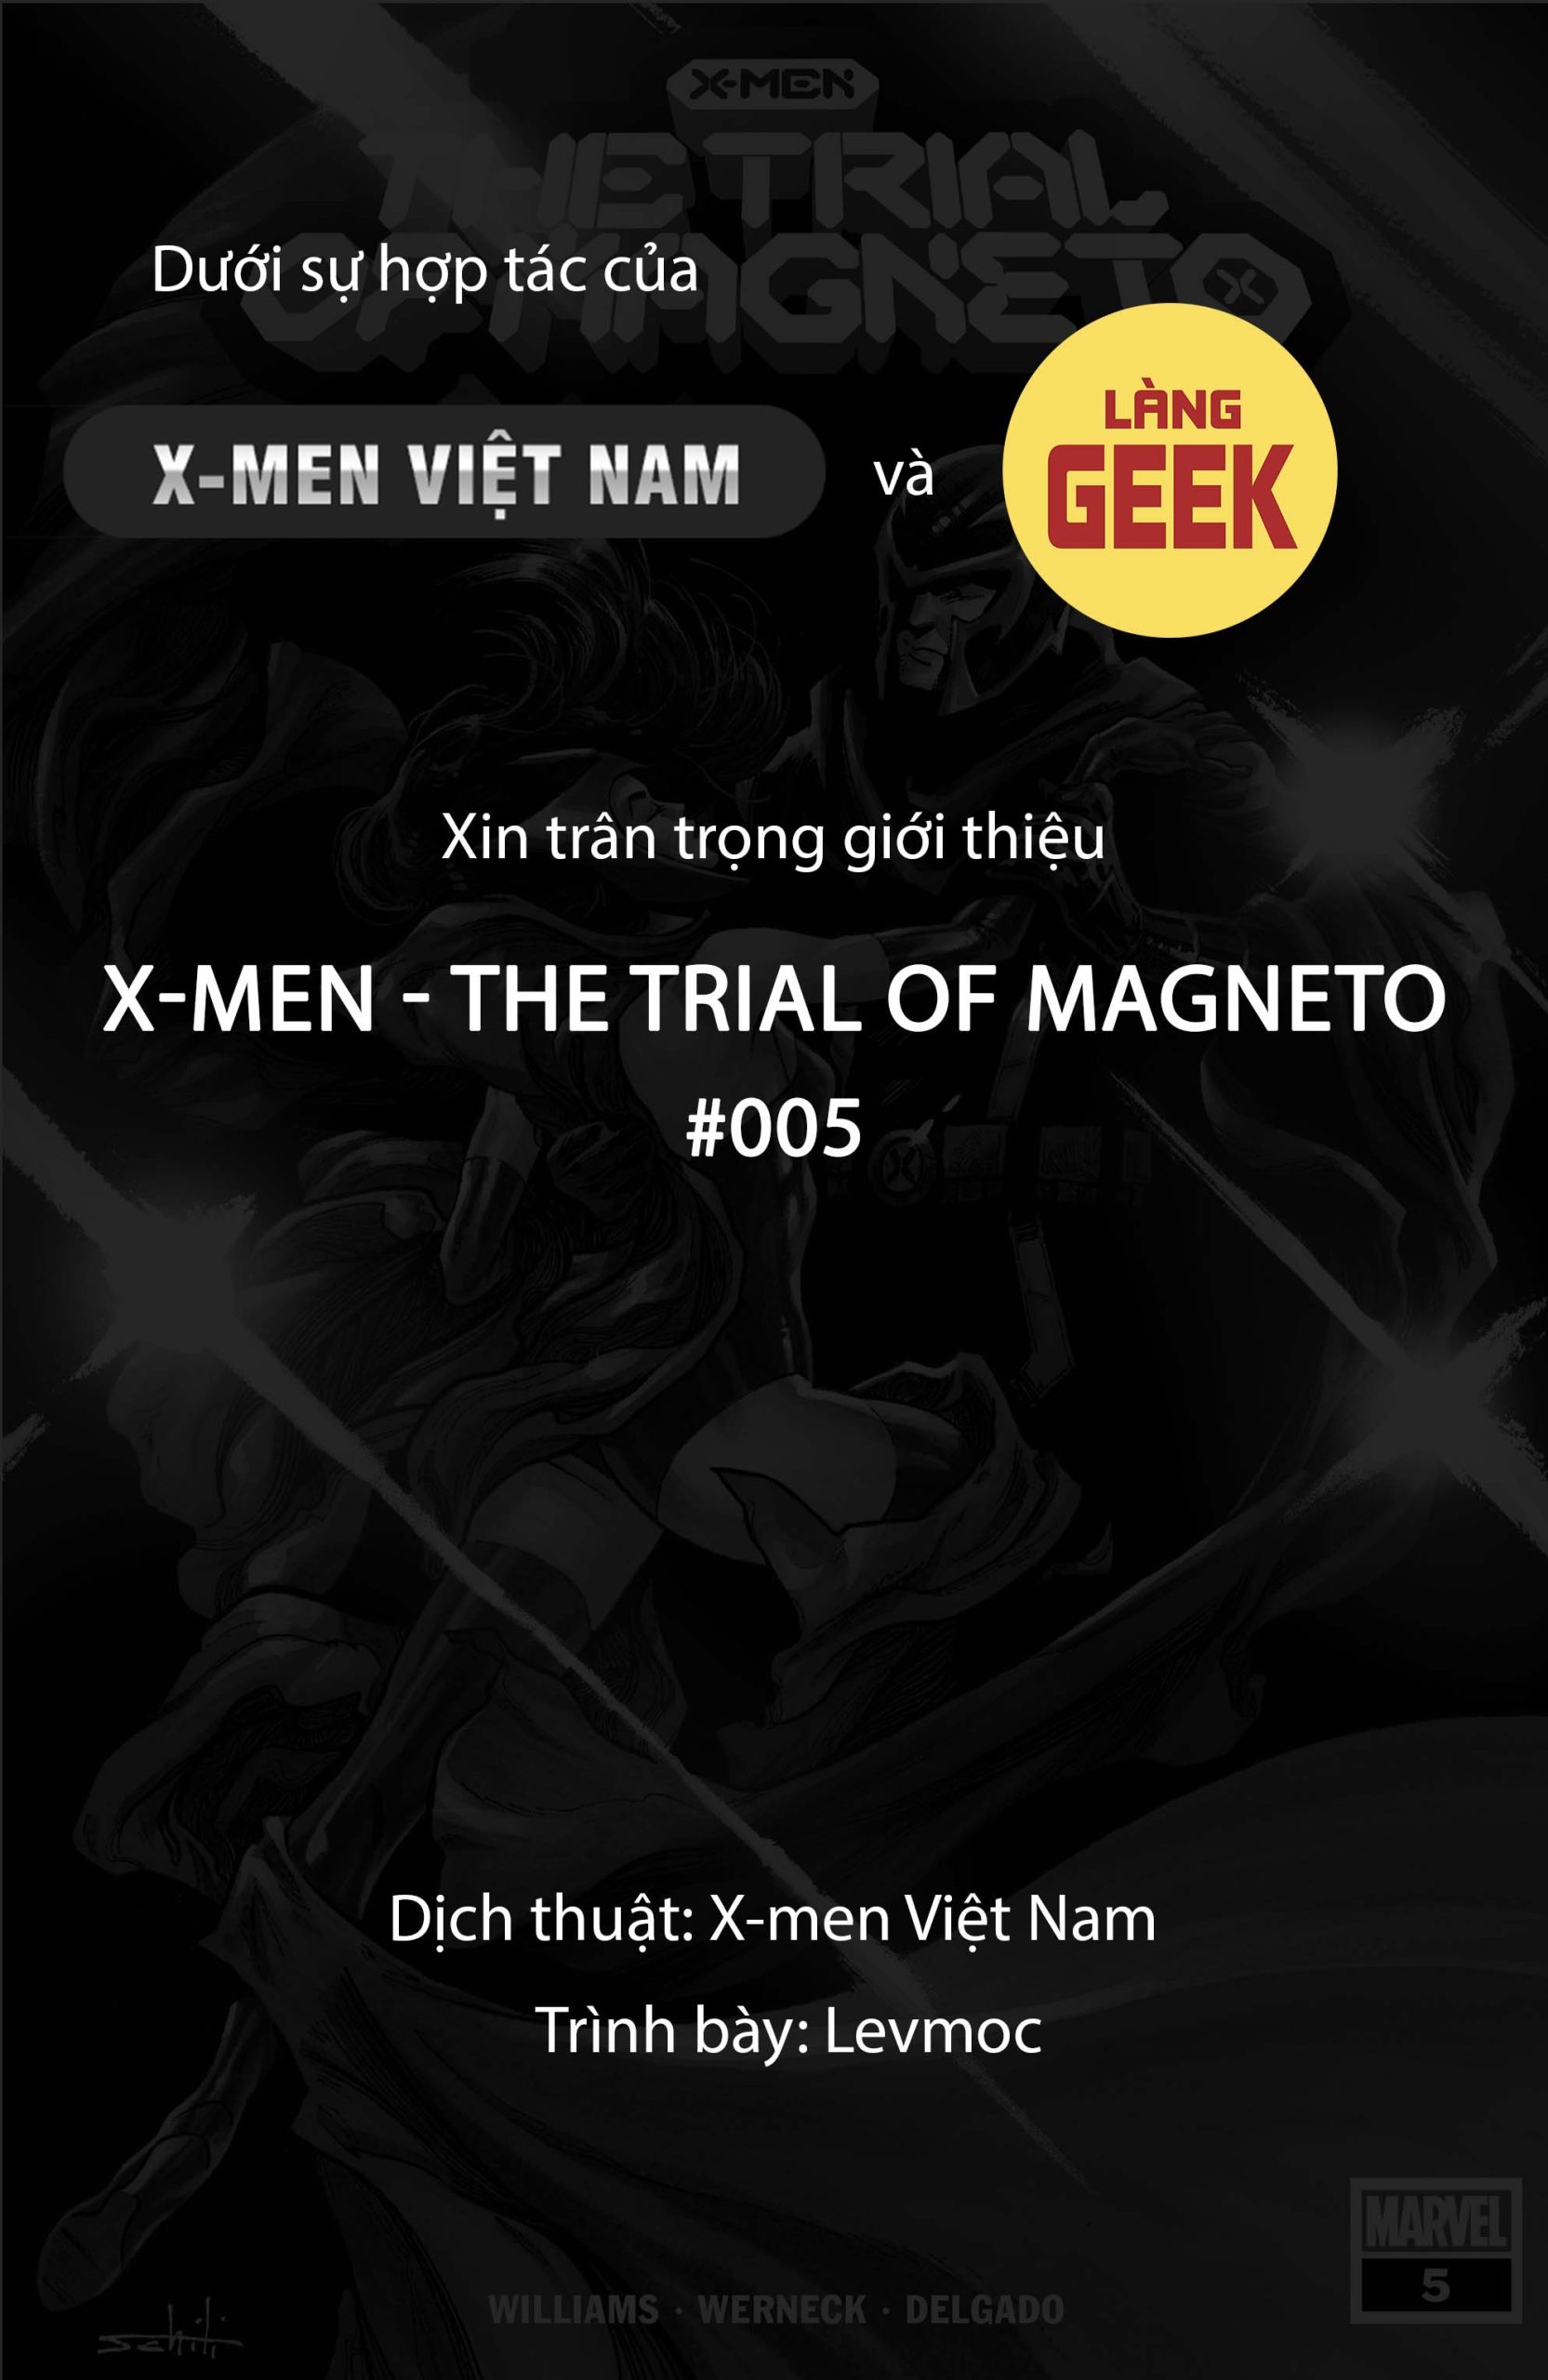 https://langgeek.net/wp-content/webpc-passthru.php?src=https://langgeek.net/wp-content/uploads/2022/04/X-Men-The-Trial-Of-Magneto-2021-05-of-05-000-1-scaled.jpg&nocache=1